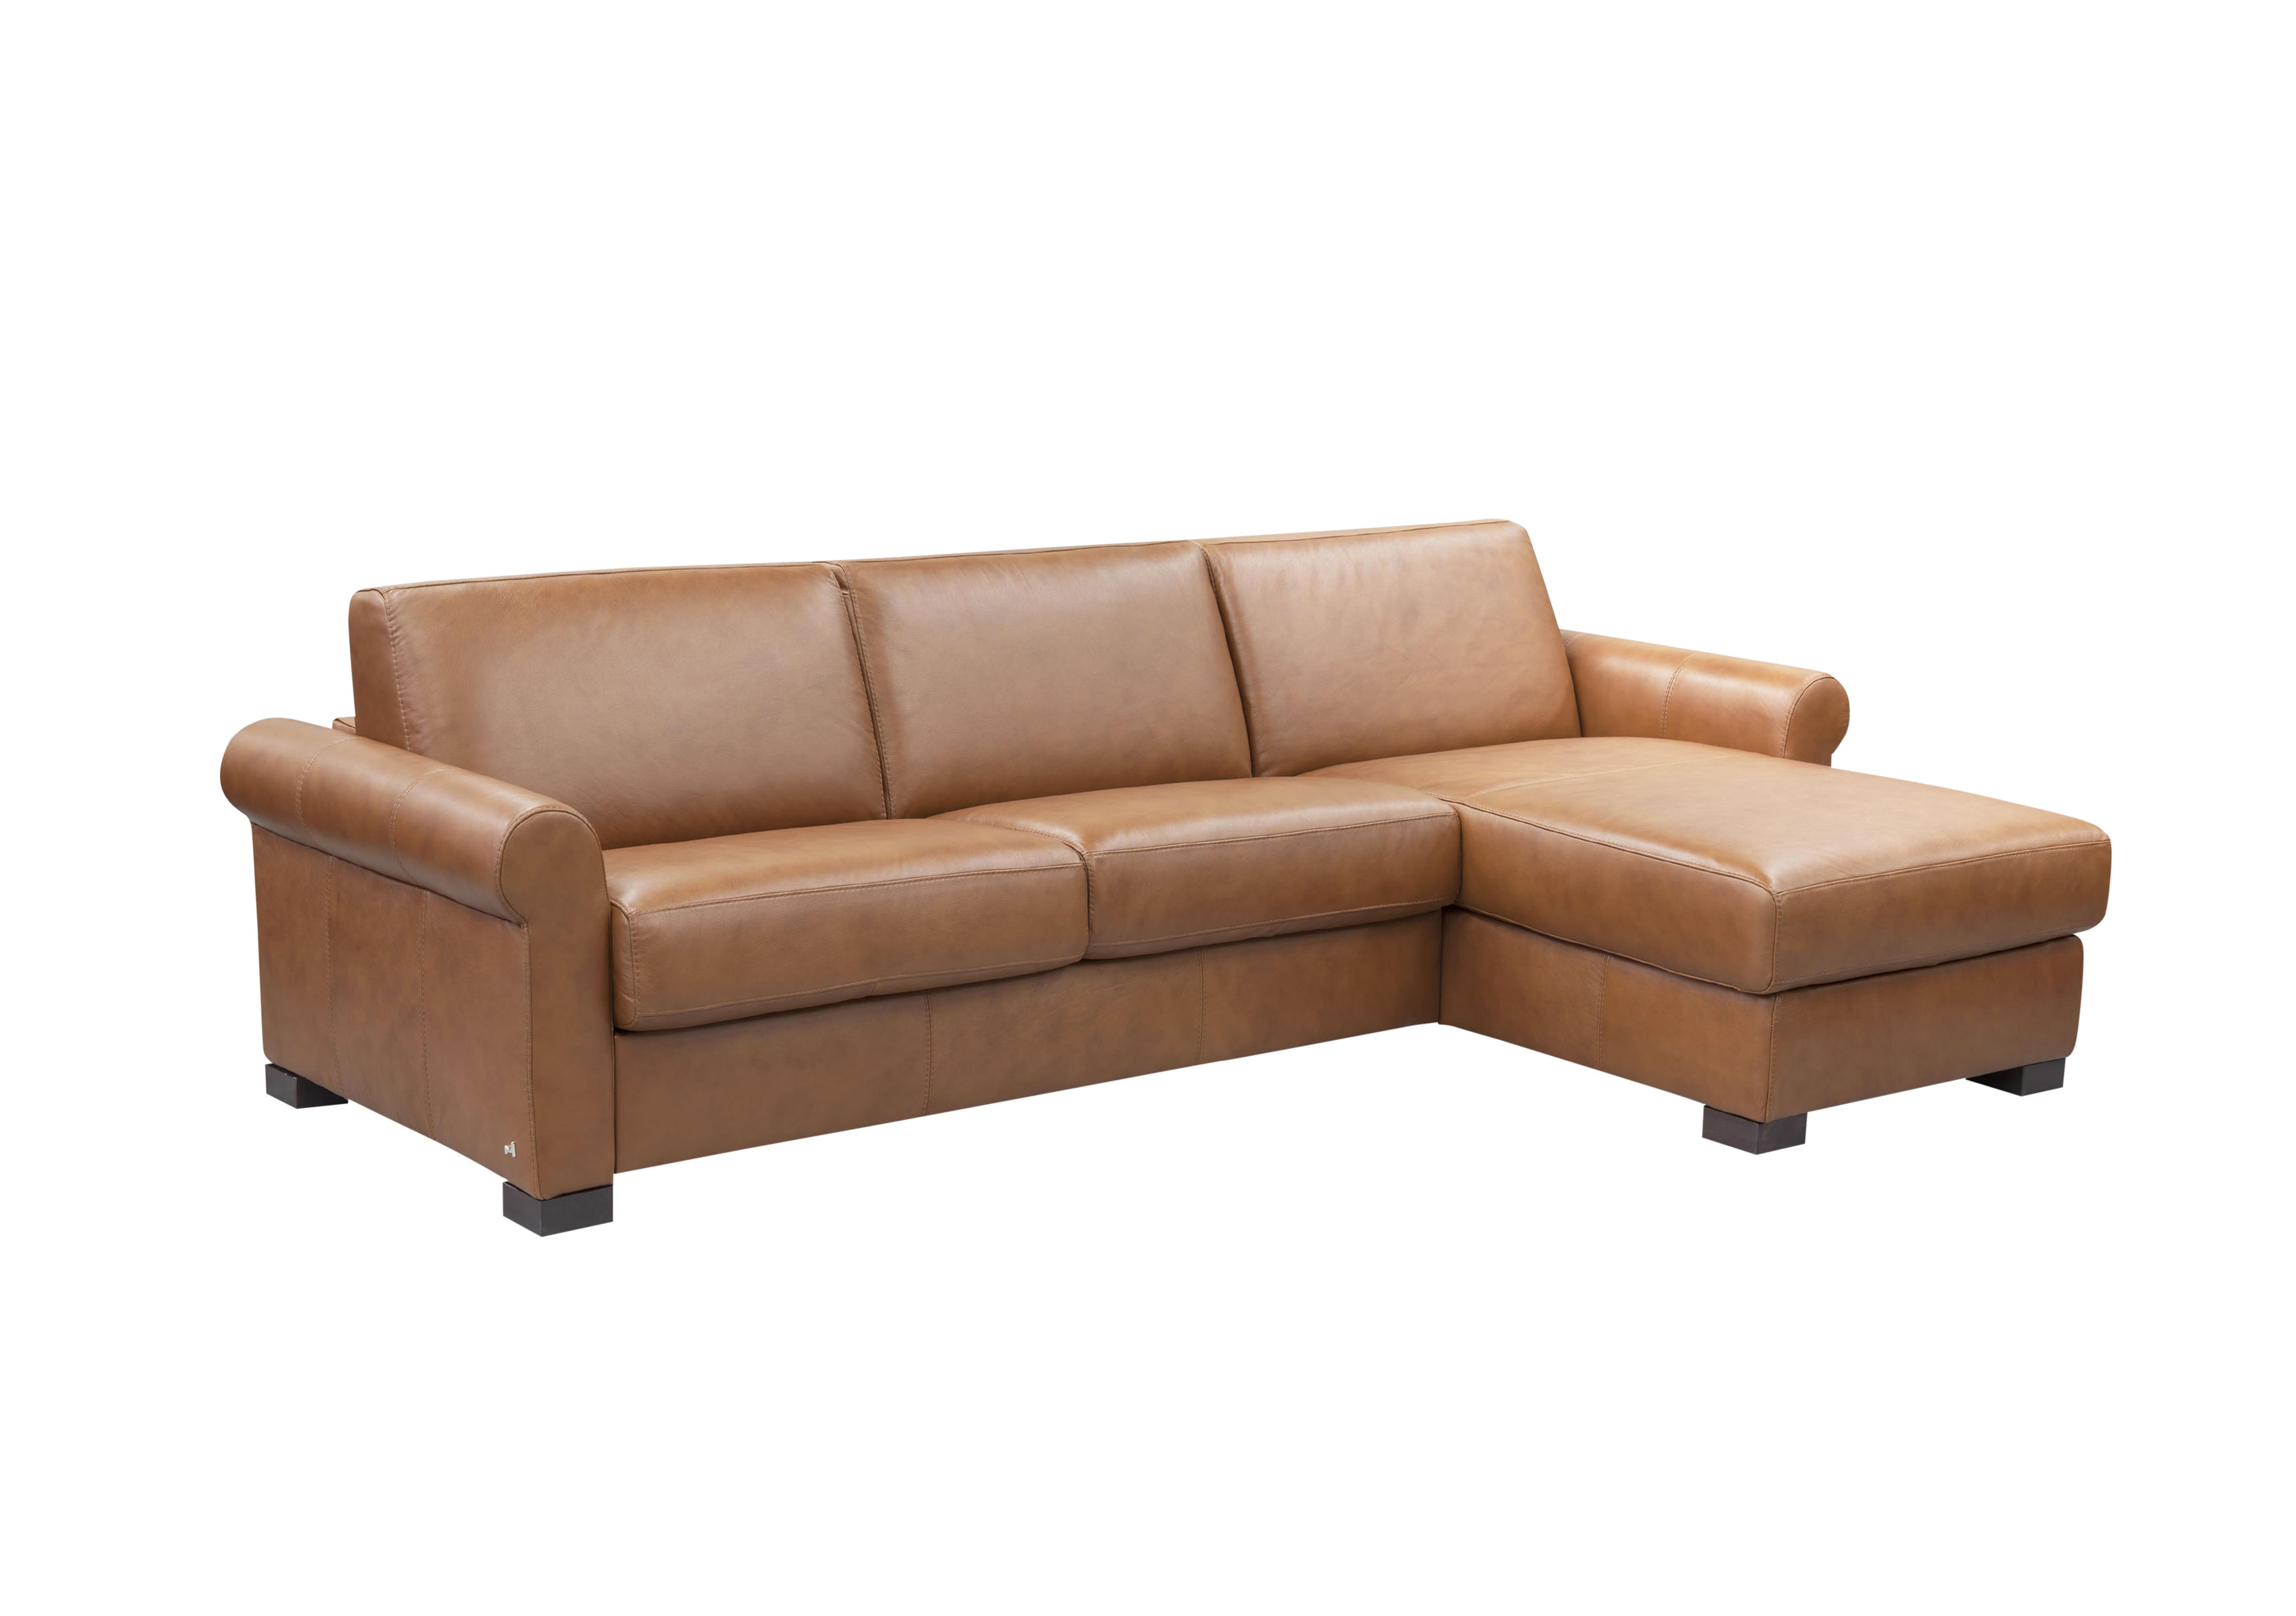 Alcova 3 Seater Leather Sofa Bed with Storage Chaise with Scroll Arms in Botero Cuoio 2151 on Furniture Village